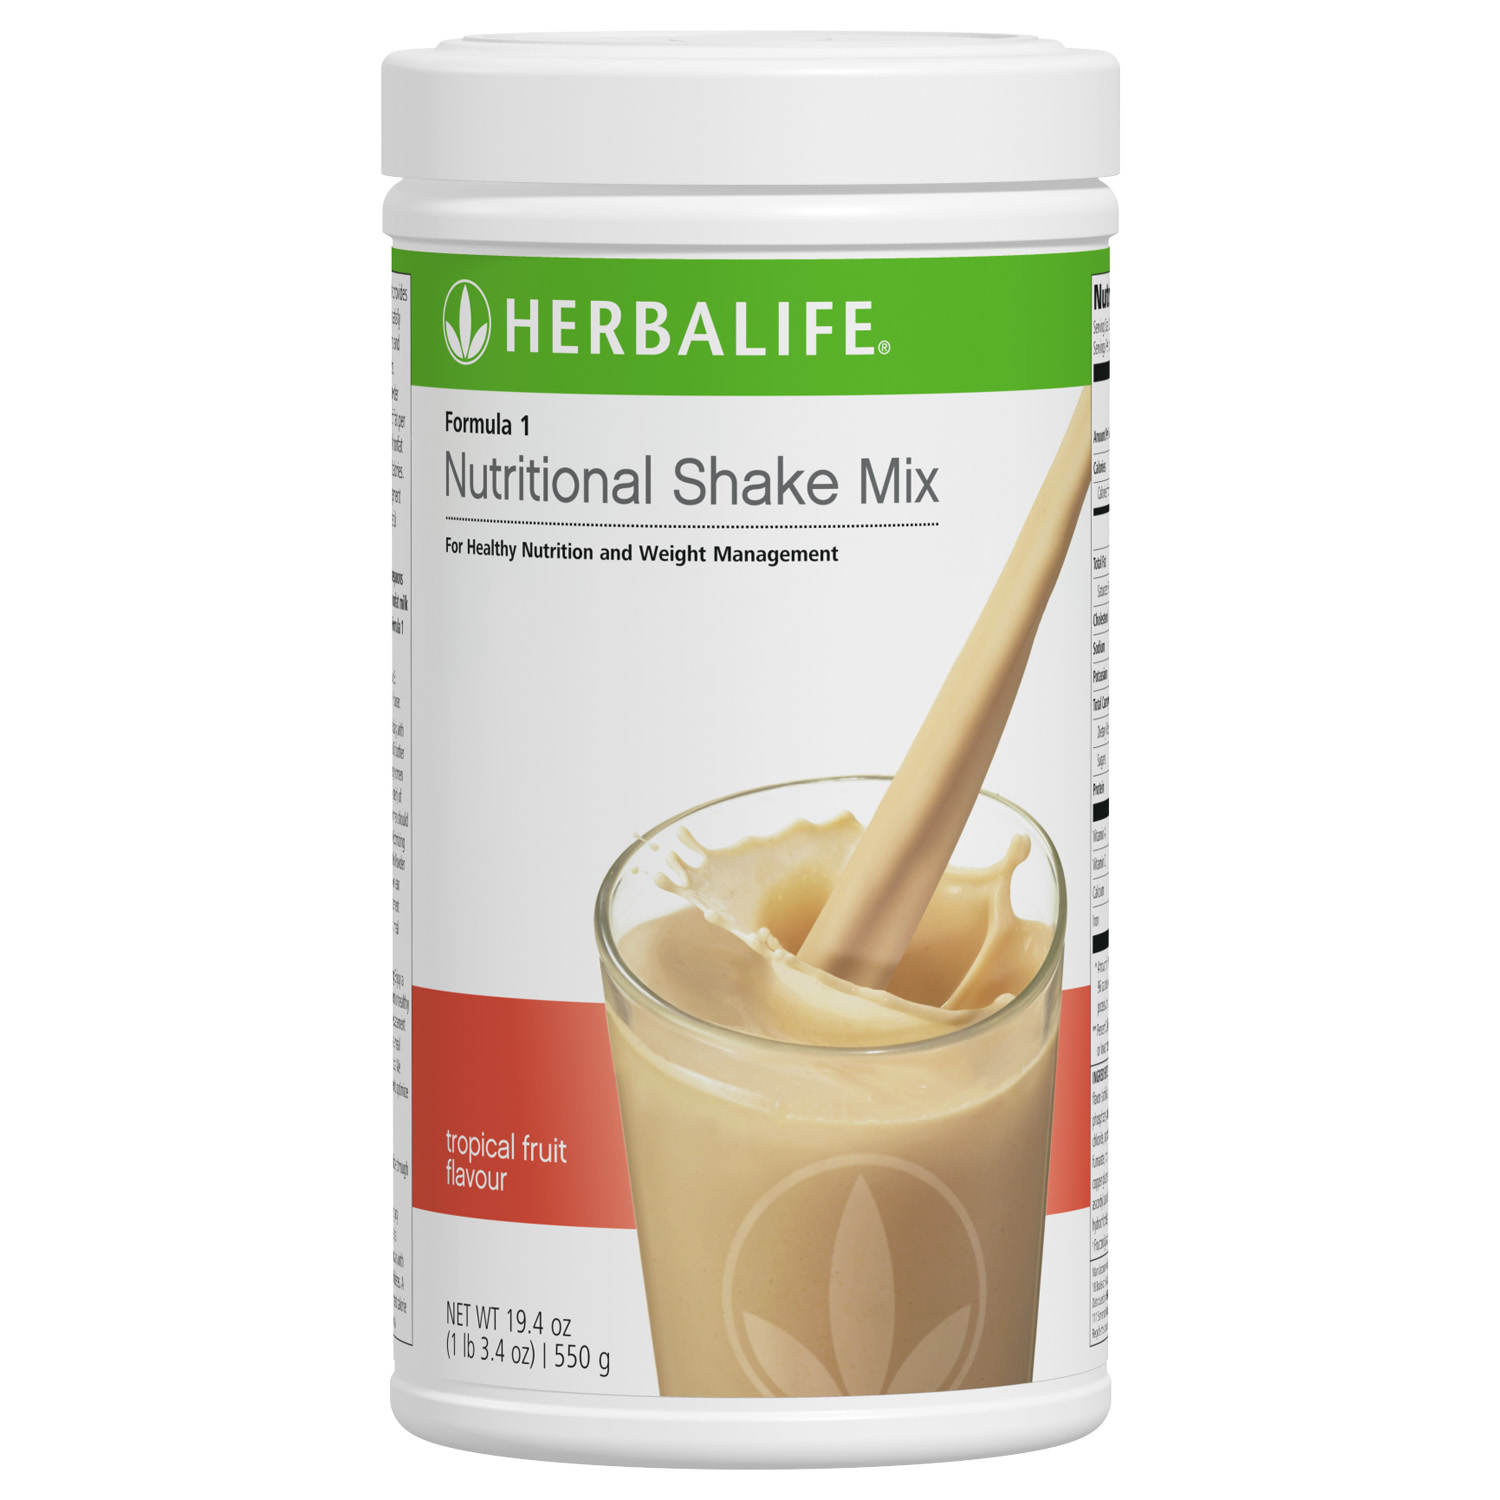 0144 Herbalife Nutrition Formula 1 Nutritional Shake Mix Tropical Fruit Protein